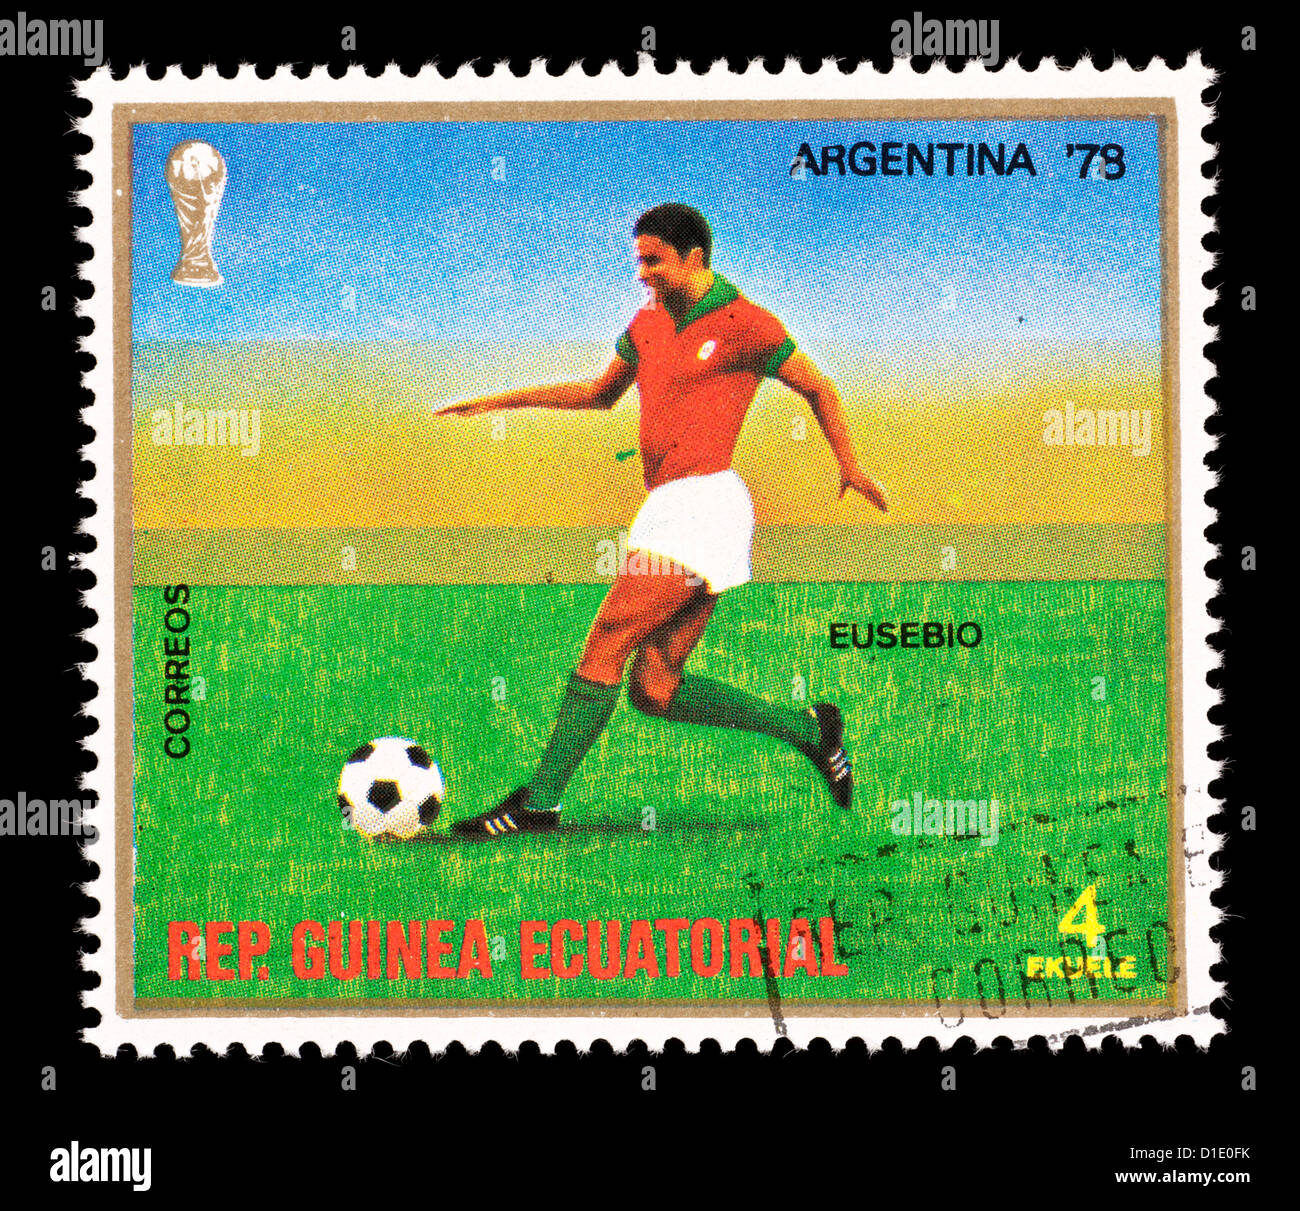 Postage stamp from Equatorial Guinea depicting a soccer player, issued for the 1978 World Cup in Argentina Stock Photo